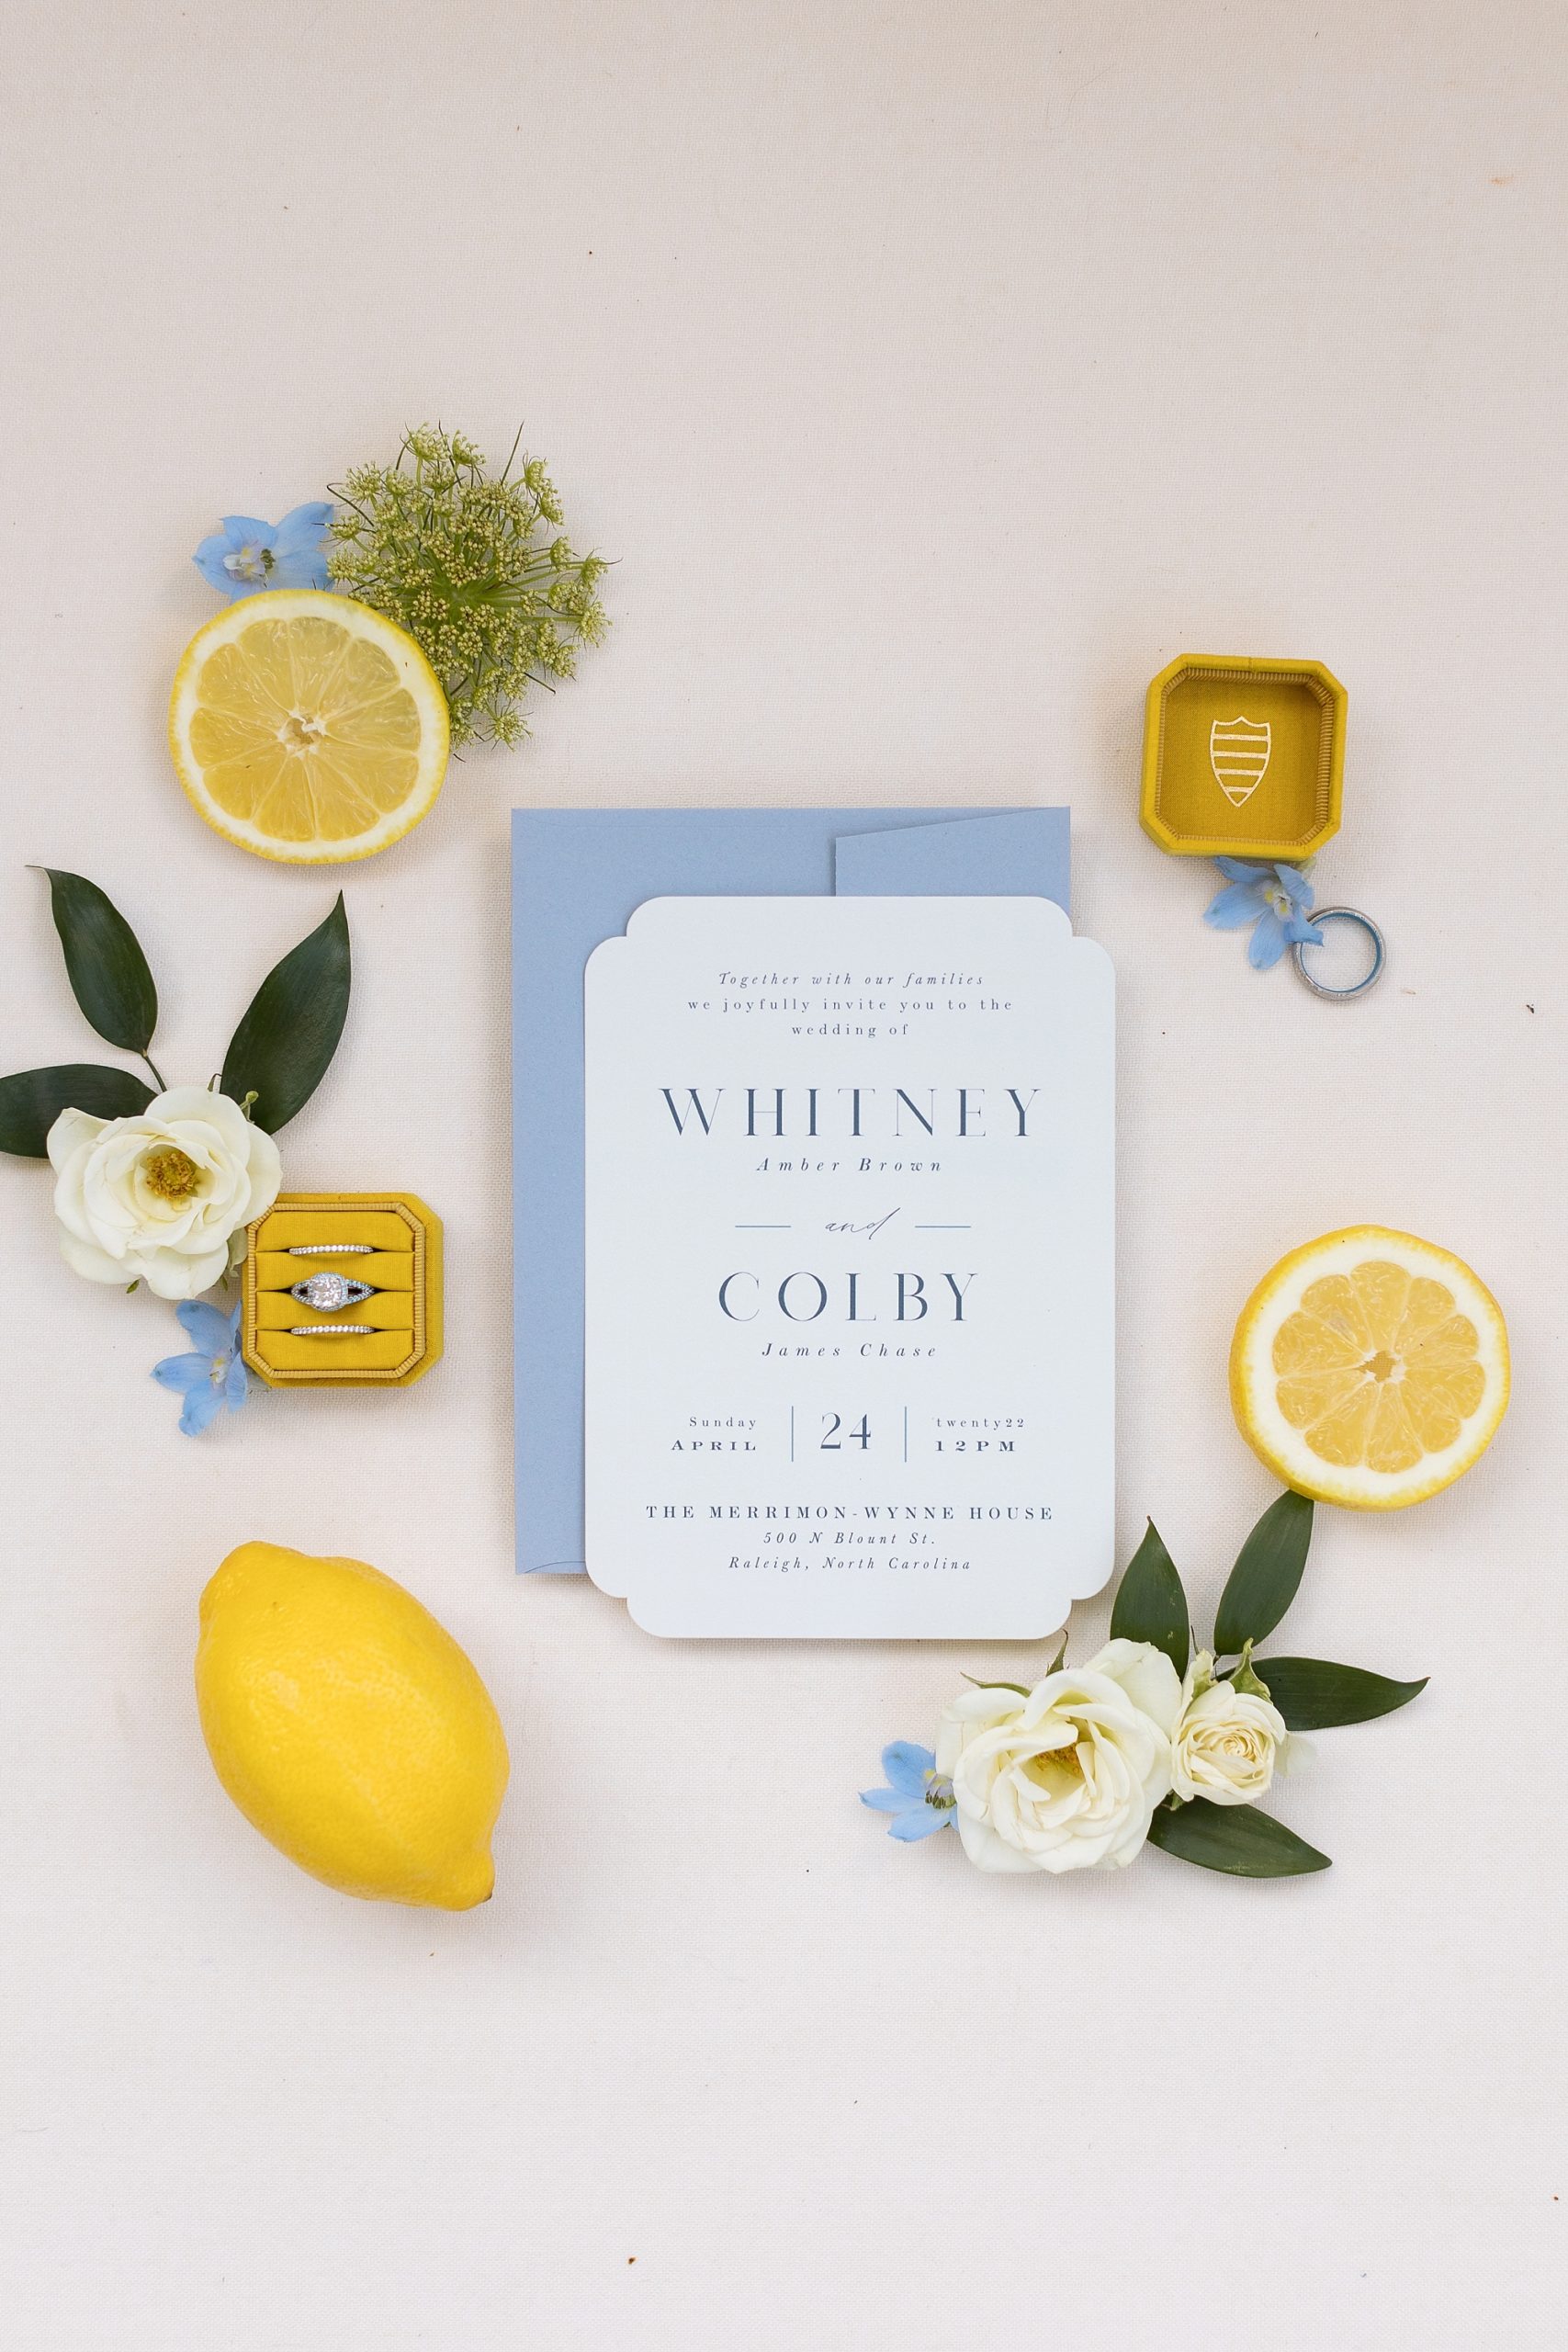 Photo of wedding details with lemons and blue invitation | Raleigh NC Wedding Photographer